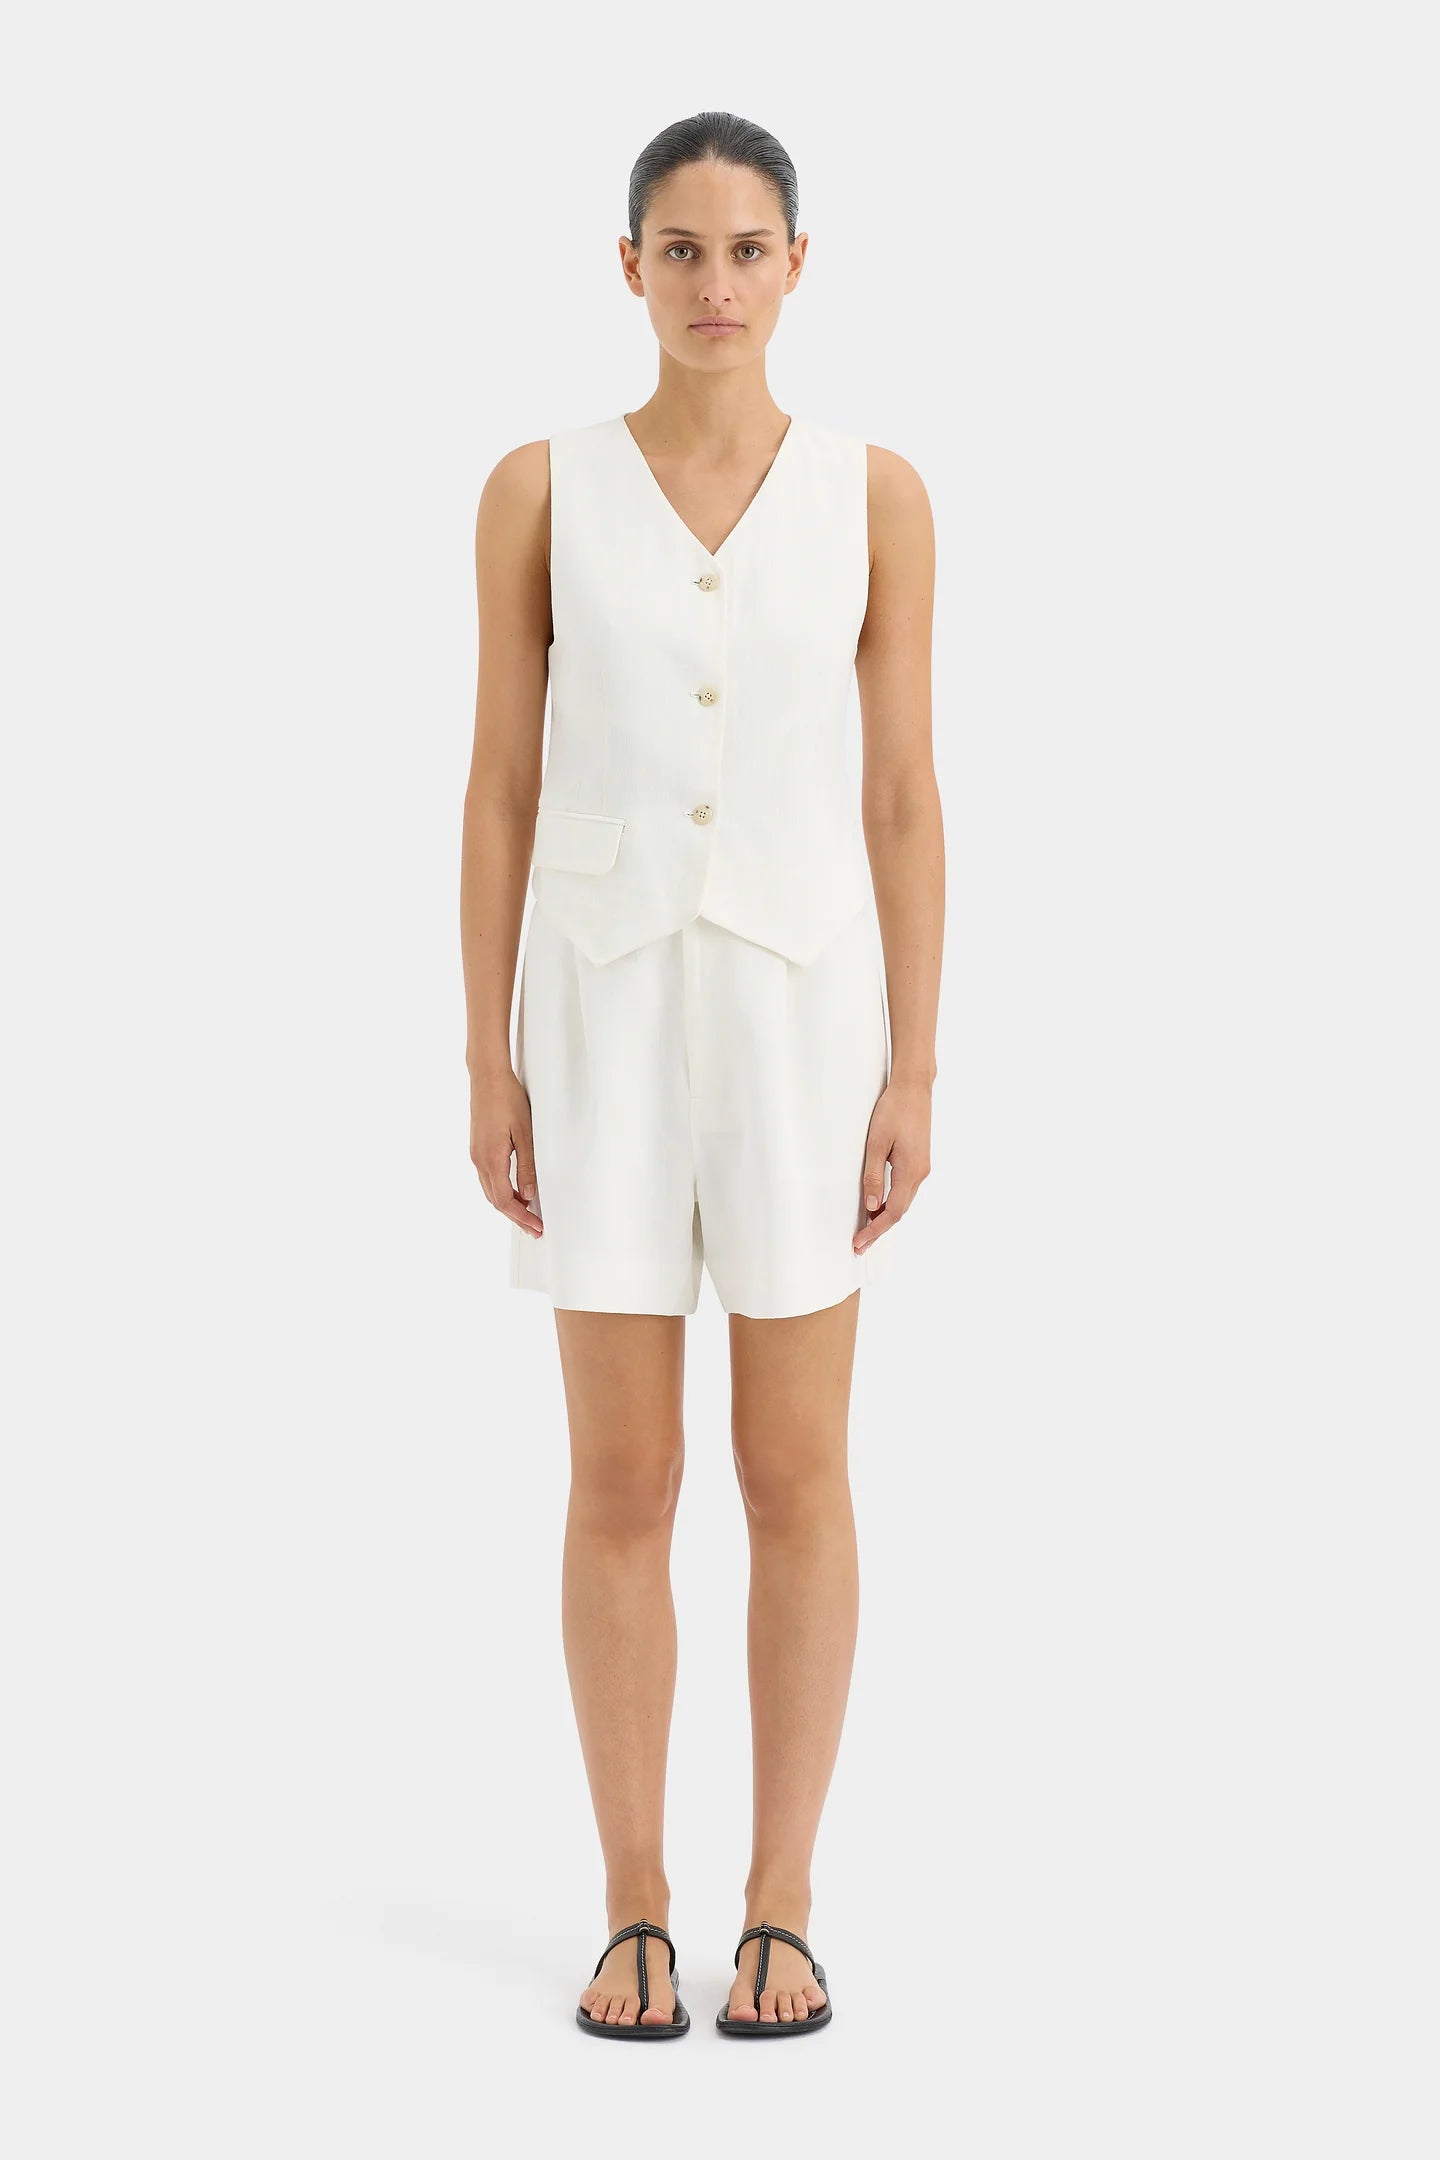 SIR. Clemence Tailored Vest - Ivory